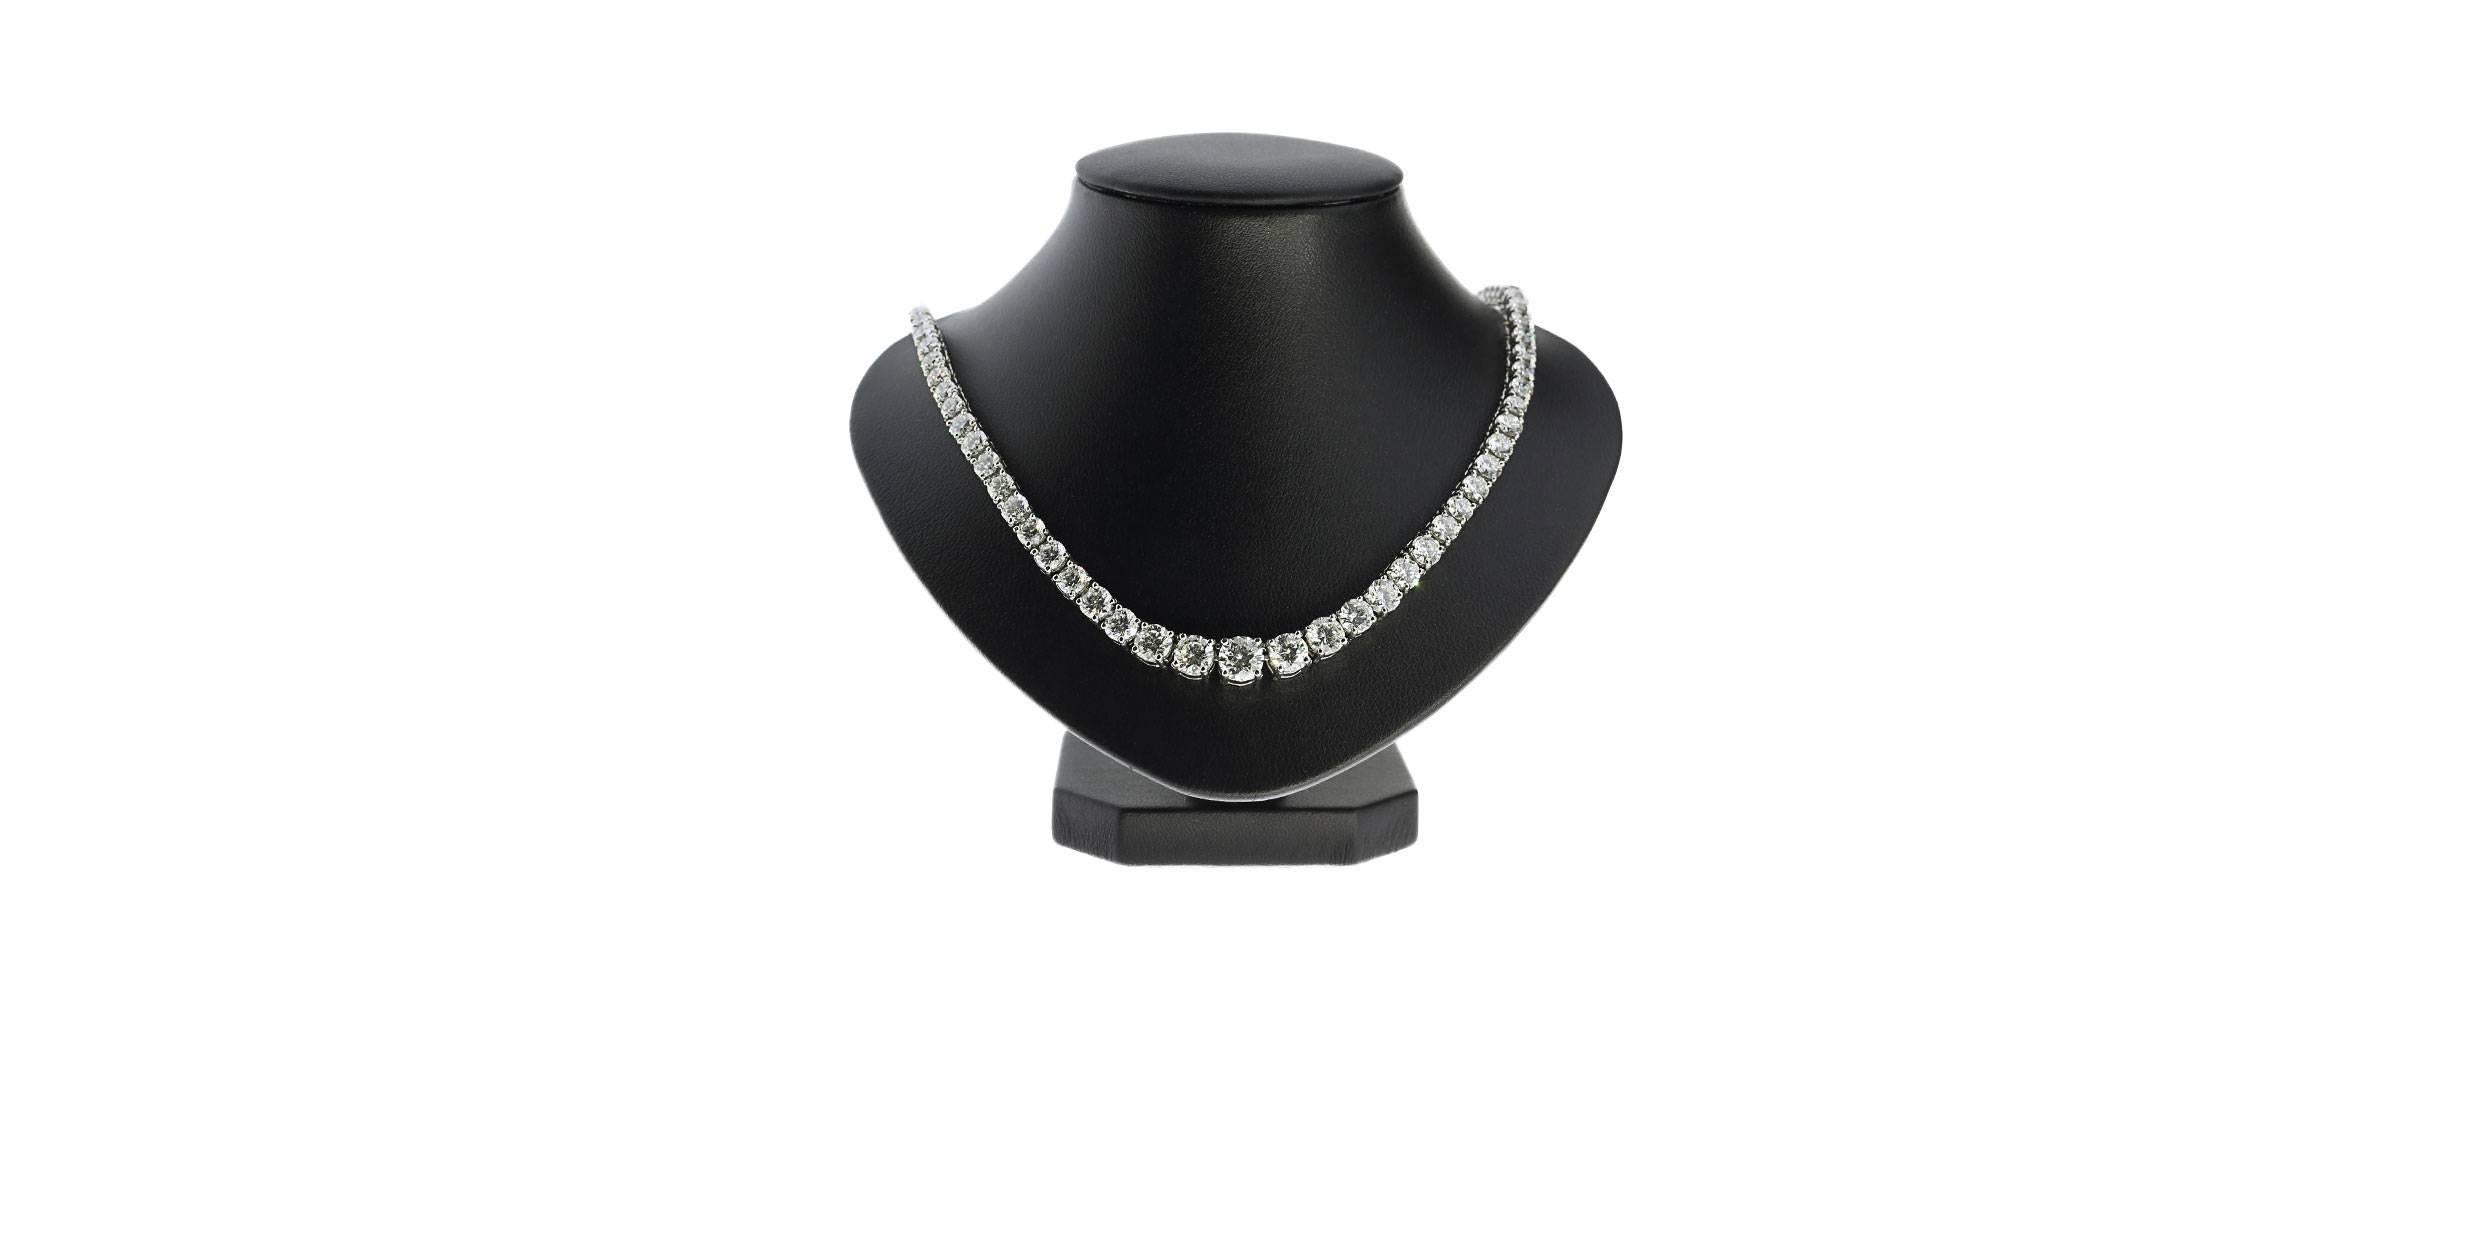 This gorgeous necklace will simply take your breath away! It features a 113 natural round brilliant & marquise cut diamonds that have a combined total weight of 25.32 carats. These sparkling diamonds conservatively grade as GH/VS1-SI1 in quality.